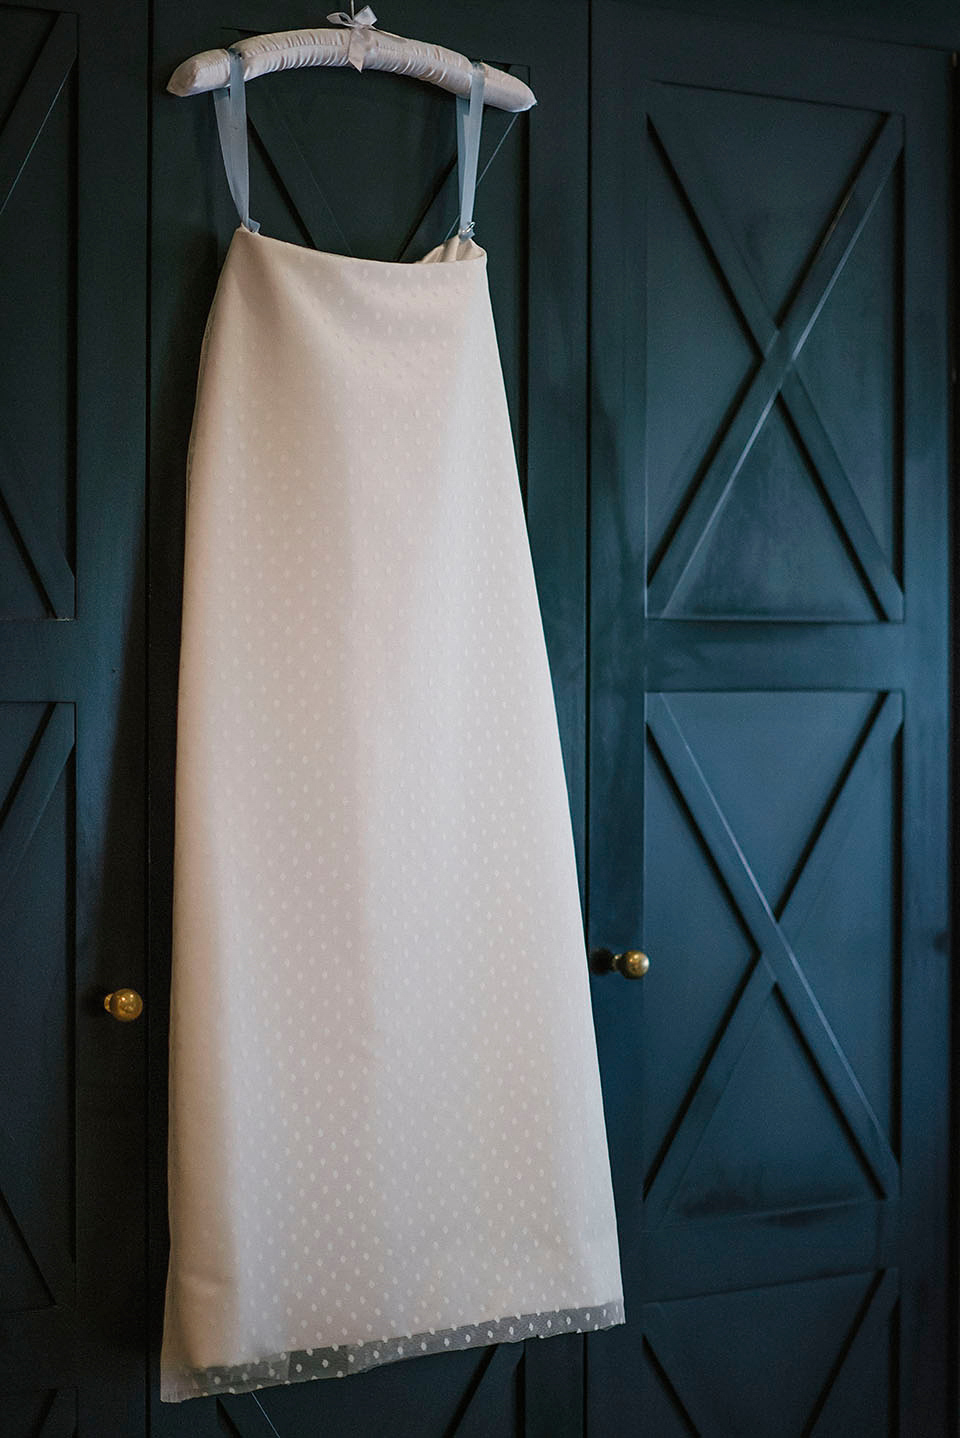 Two polka dot skirts for a weekend wedding festival. Photography by Kerry Woods.